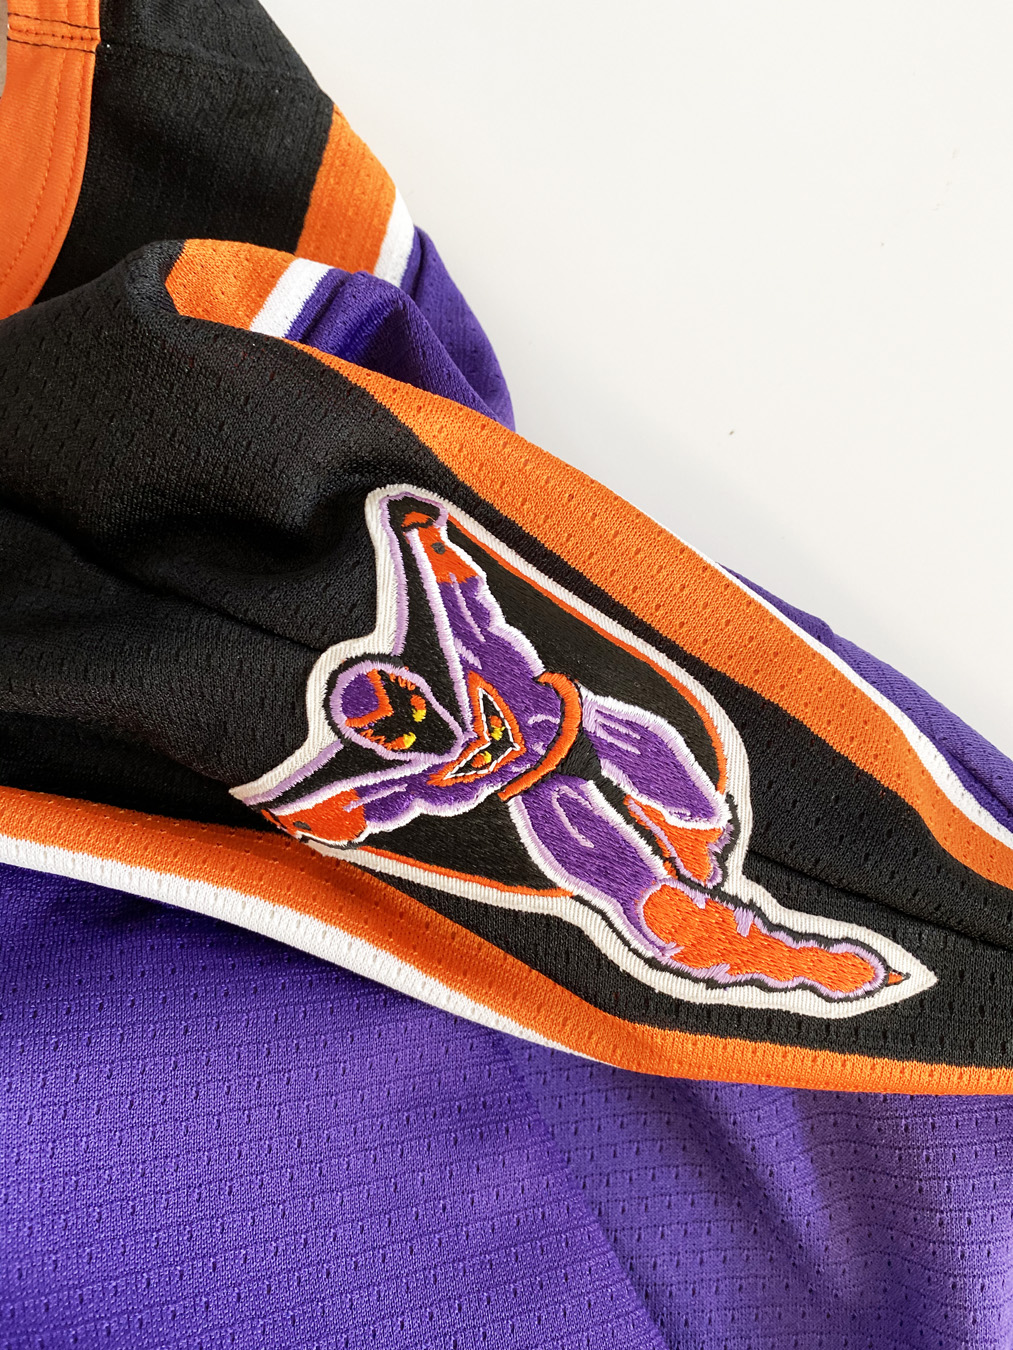 1997-98 Philadelphia Phantoms Authentic AHL Team Signed Hockey Jersey! –  Collectible Notes